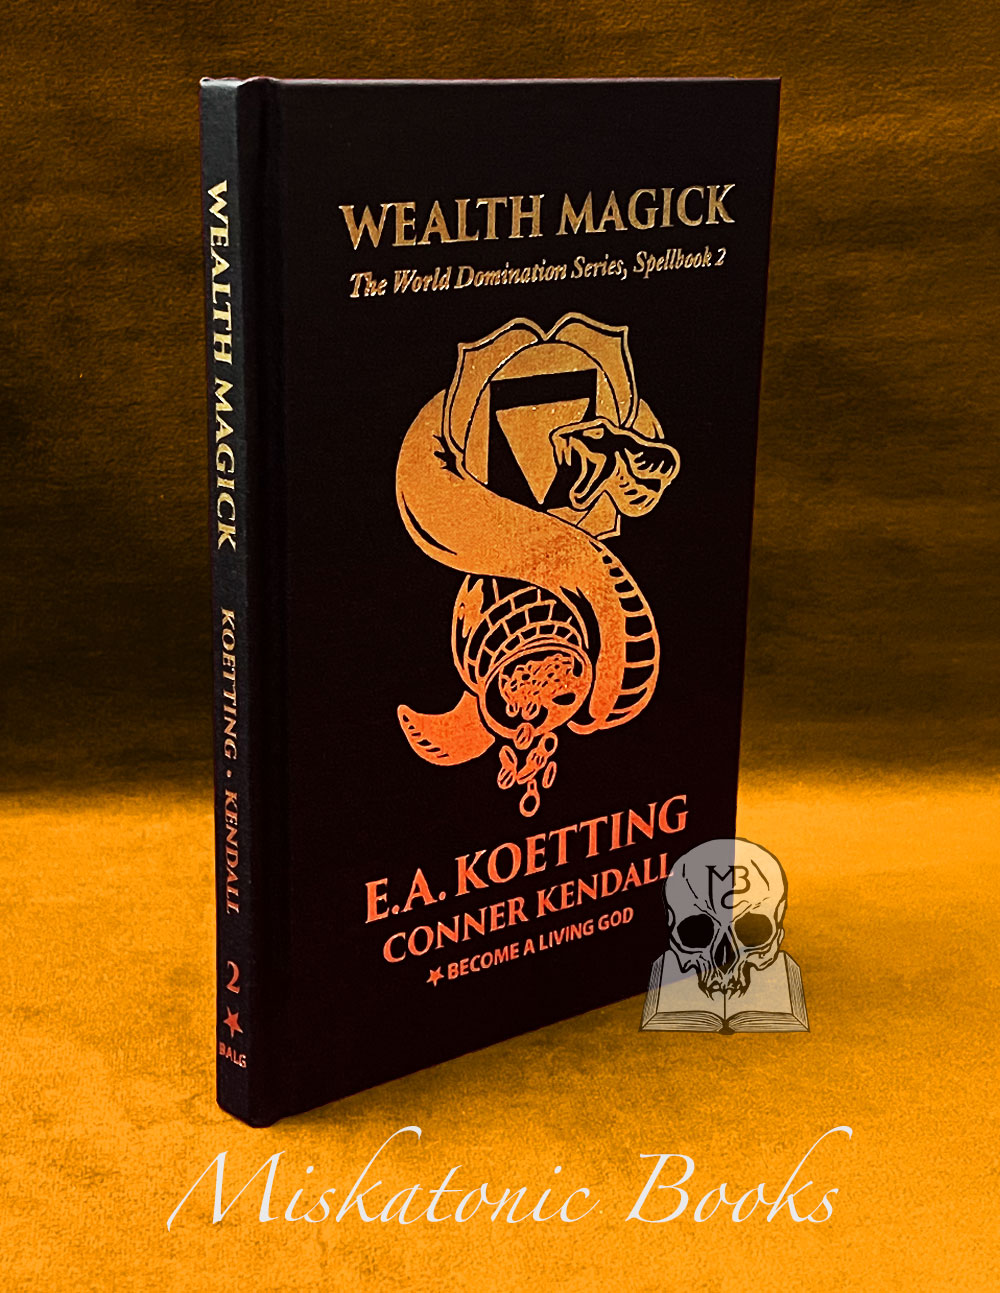 WEALTH MAGICK by E.A. Koetting and Conner Kendall - Hardcover Edition